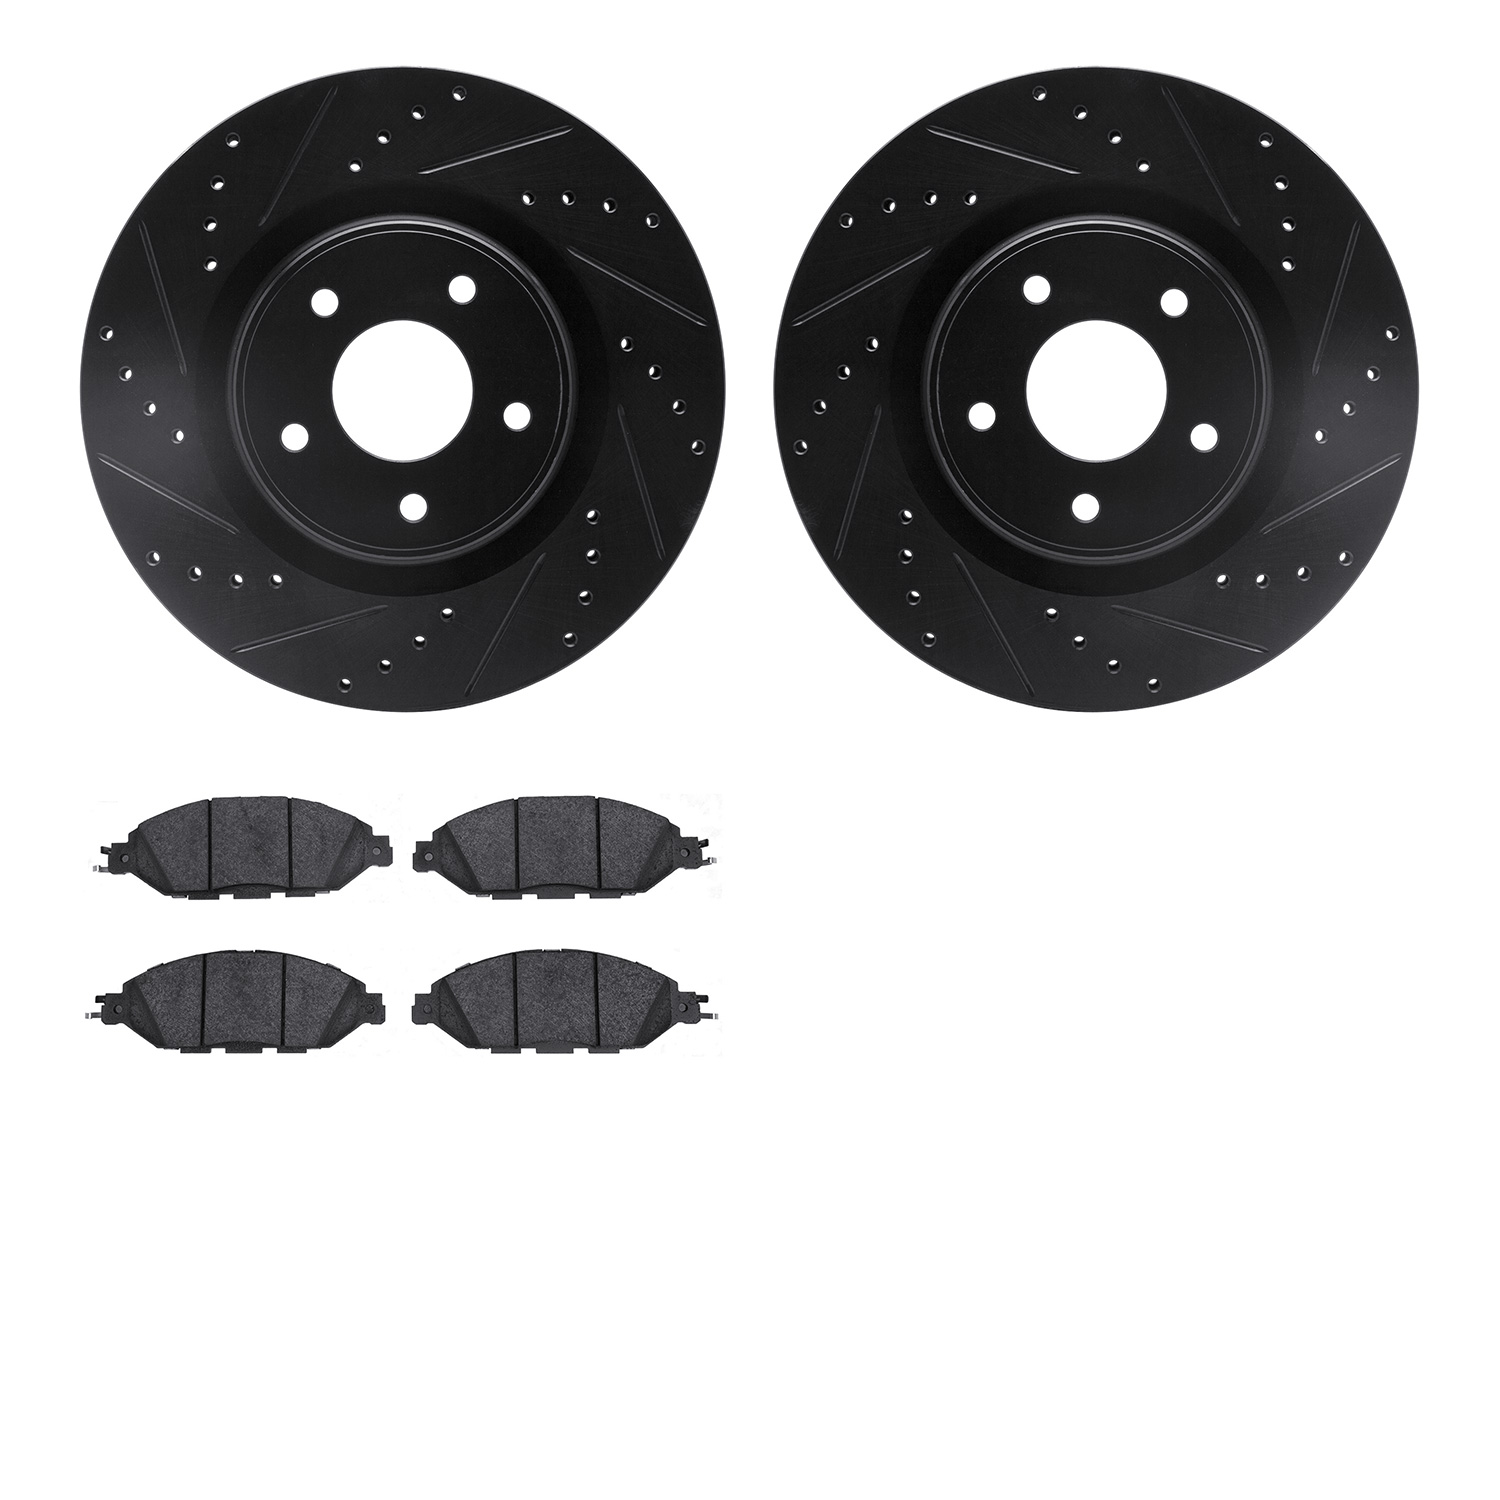 8302-67125 Drilled/Slotted Brake Rotors with 3000-Series Ceramic Brake Pads Kit [Black], Fits Select Infiniti/Nissan, Position: